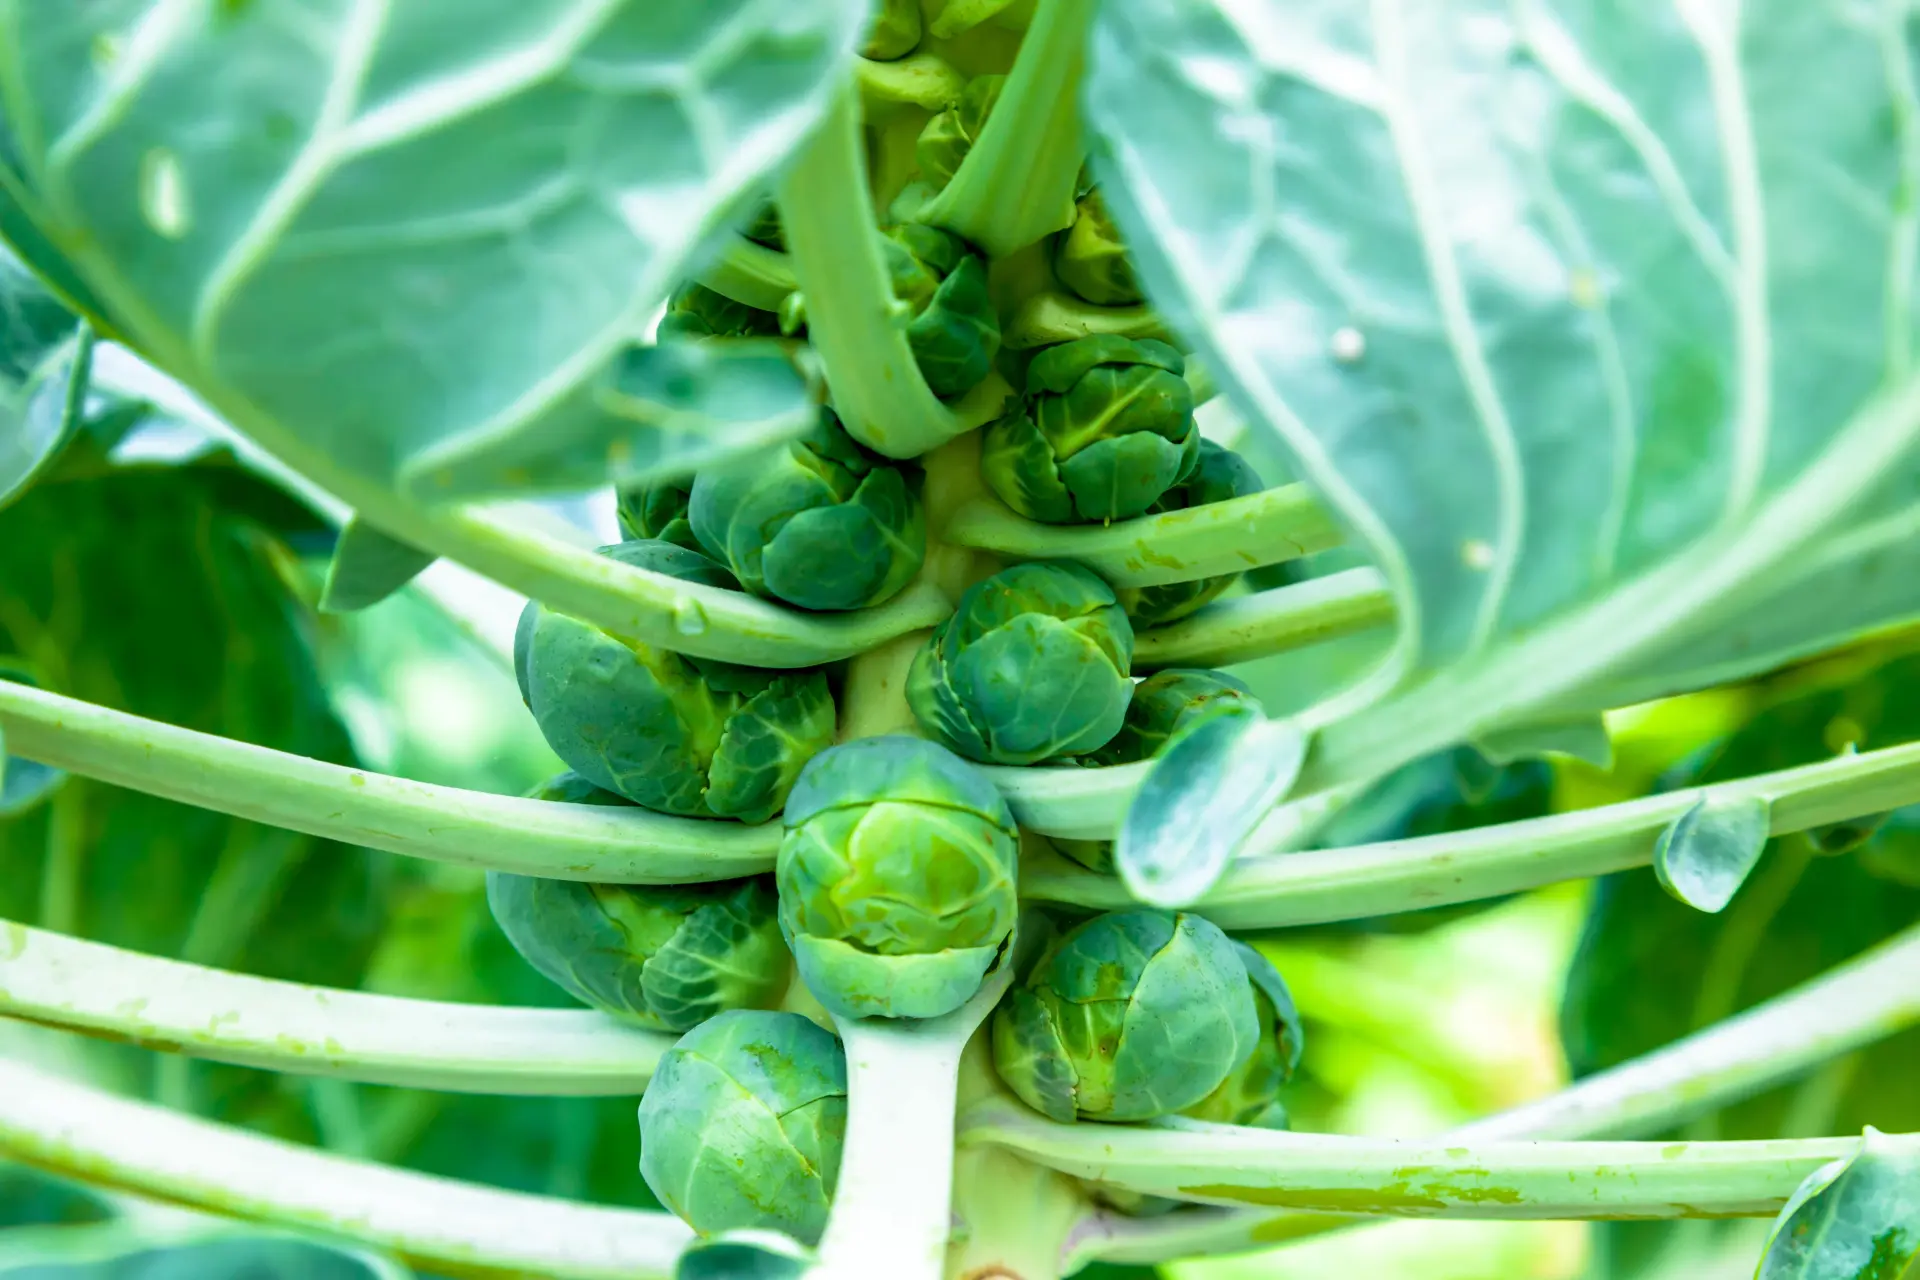 When To Start Brussel Sprout Seeds